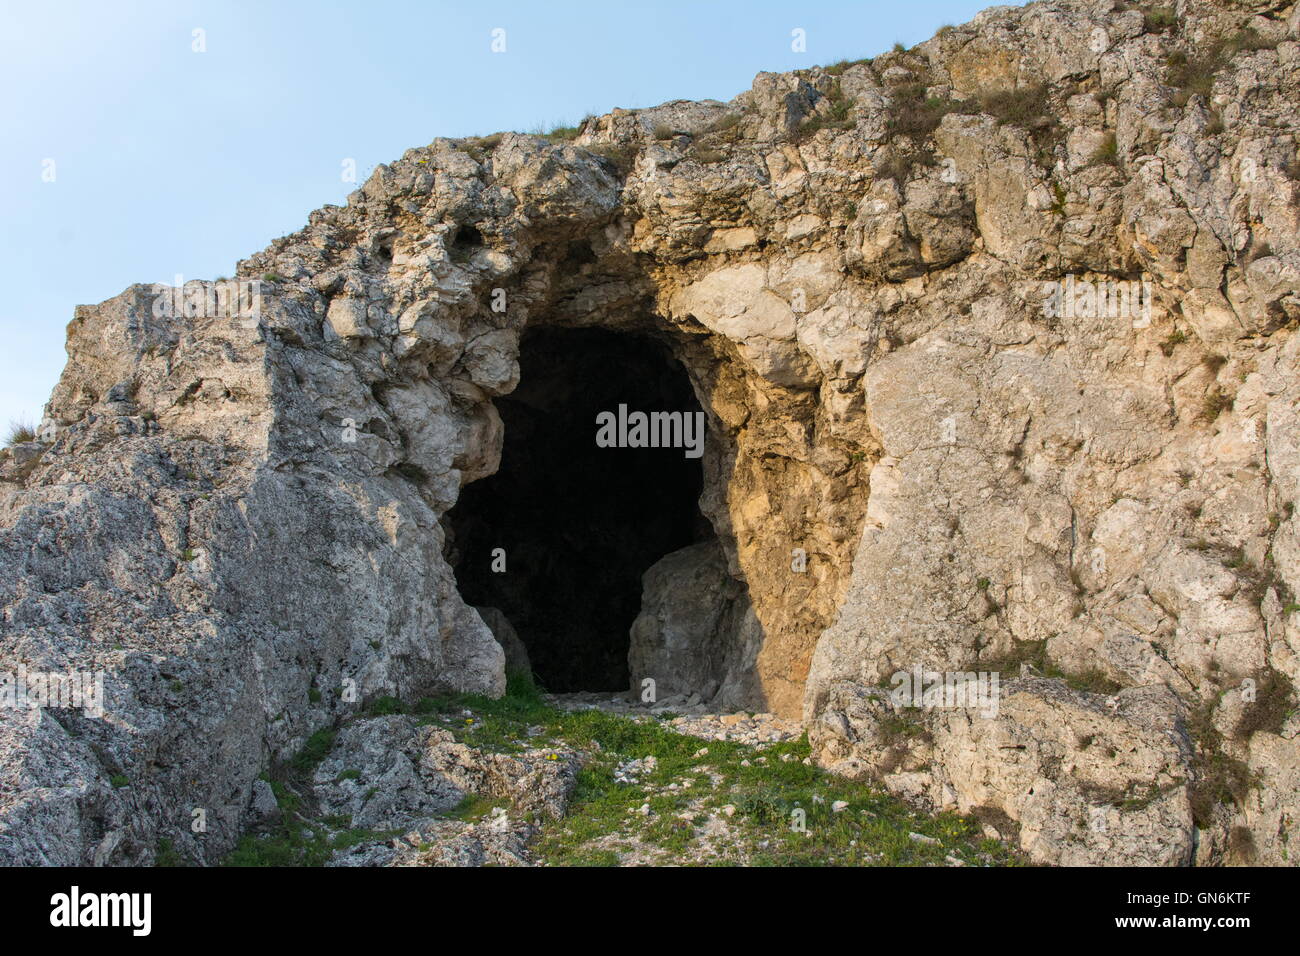 View at the natural cave entrance at the mountain Stock Photo